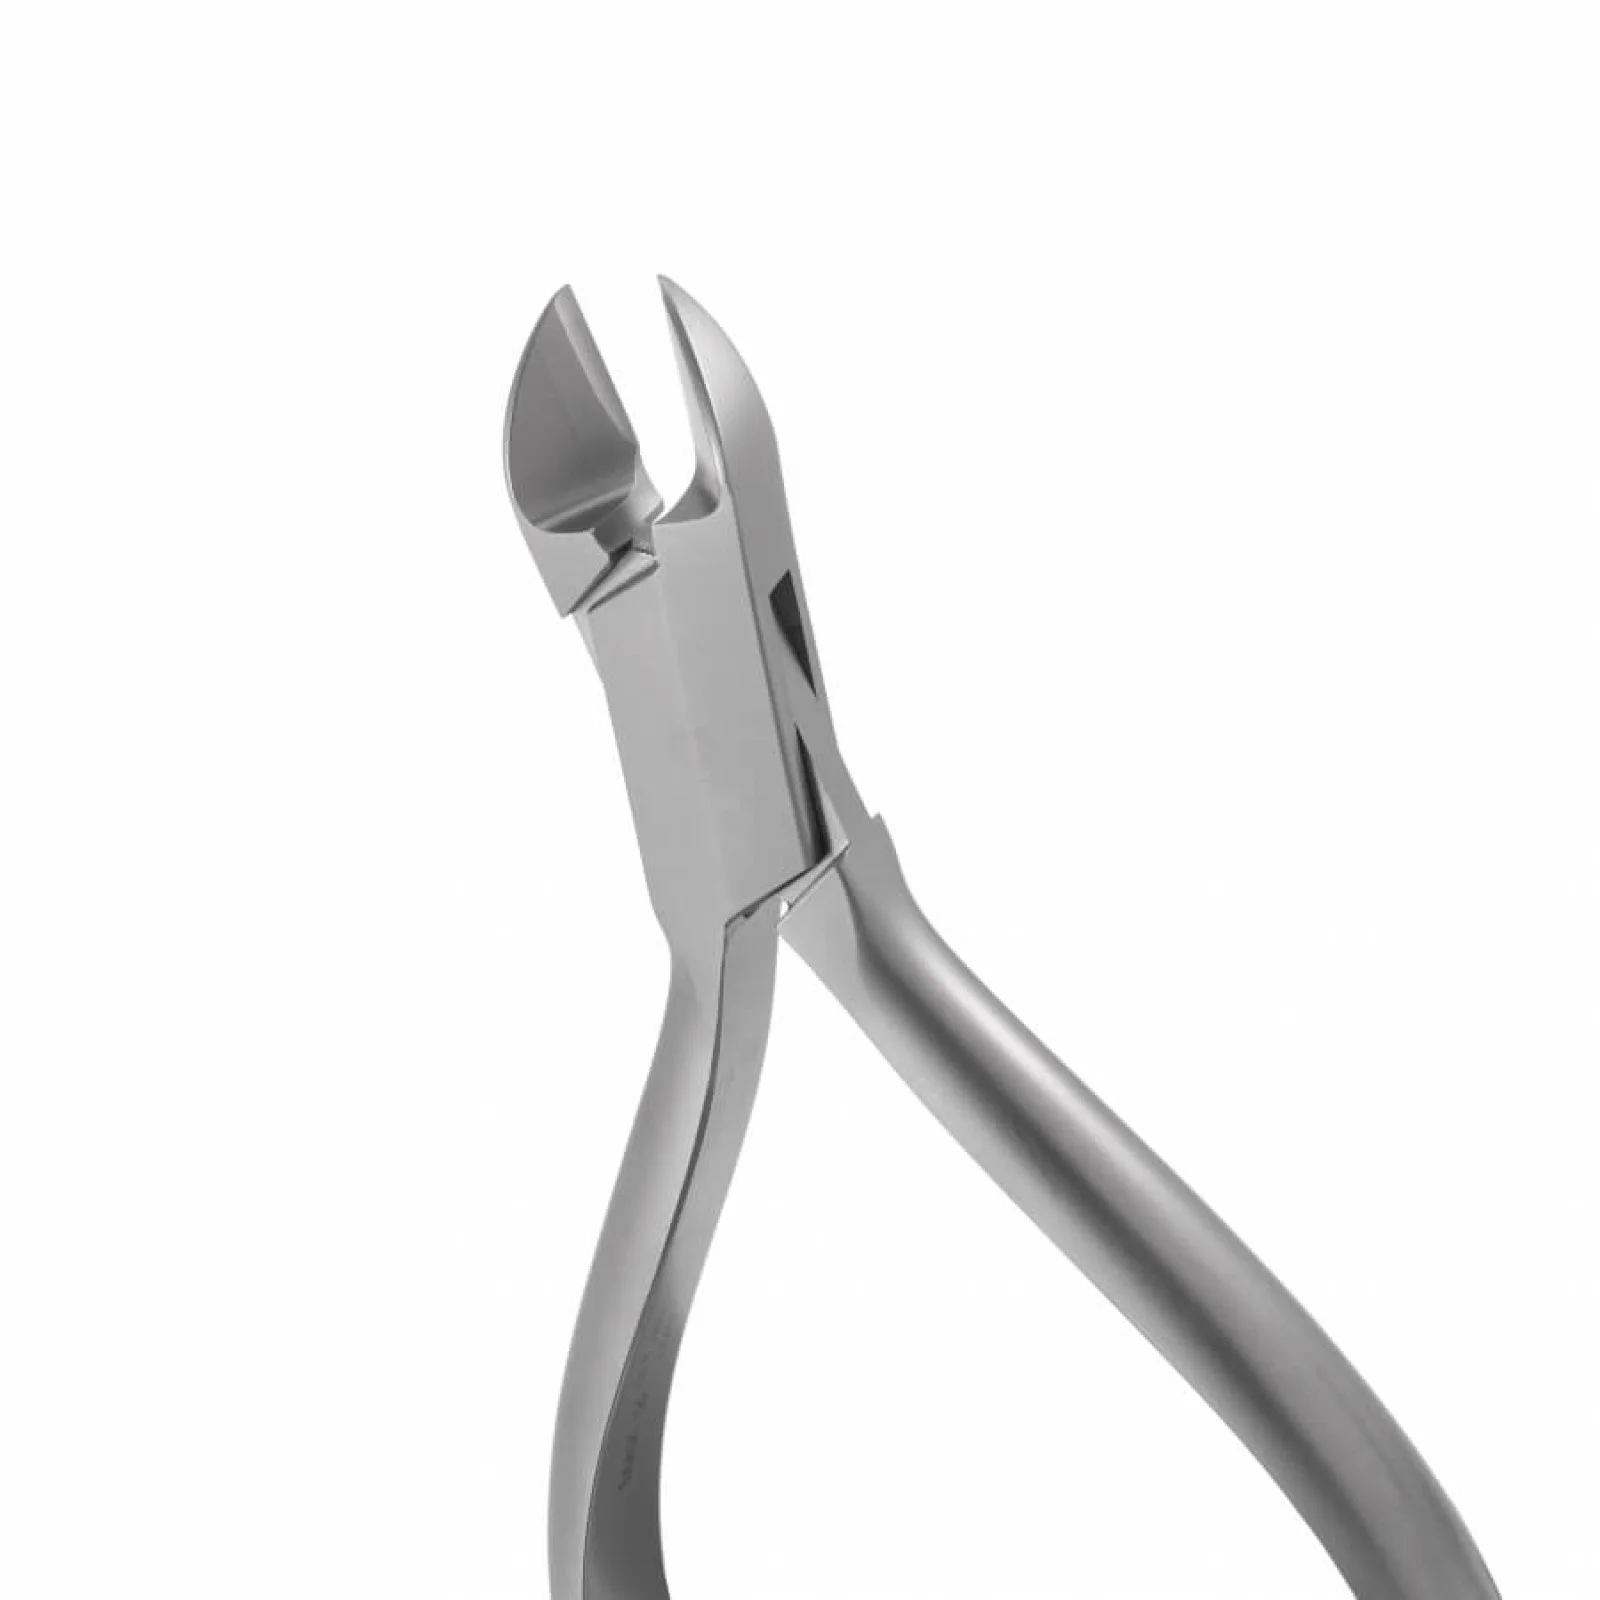 Ortho Hard wire Cutter